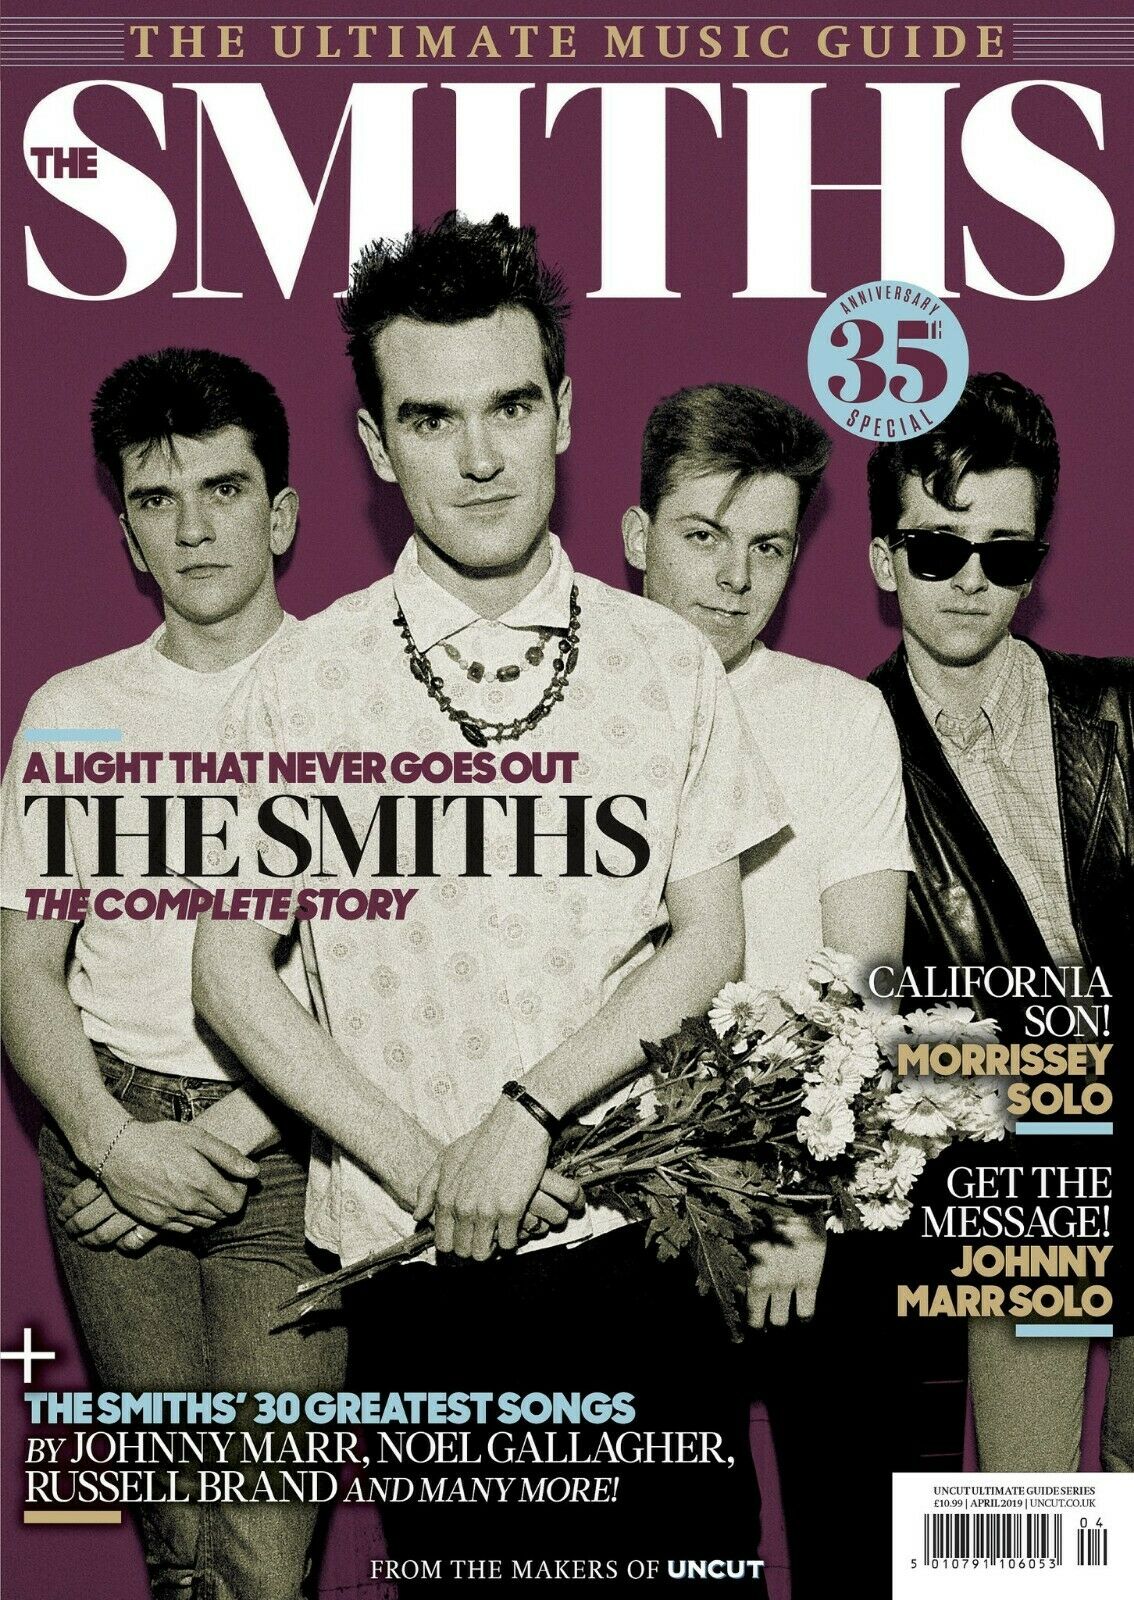 UNCUT ULTIMATE MUSIC GUIDE magazine April 2019 - The Smiths Morrissey